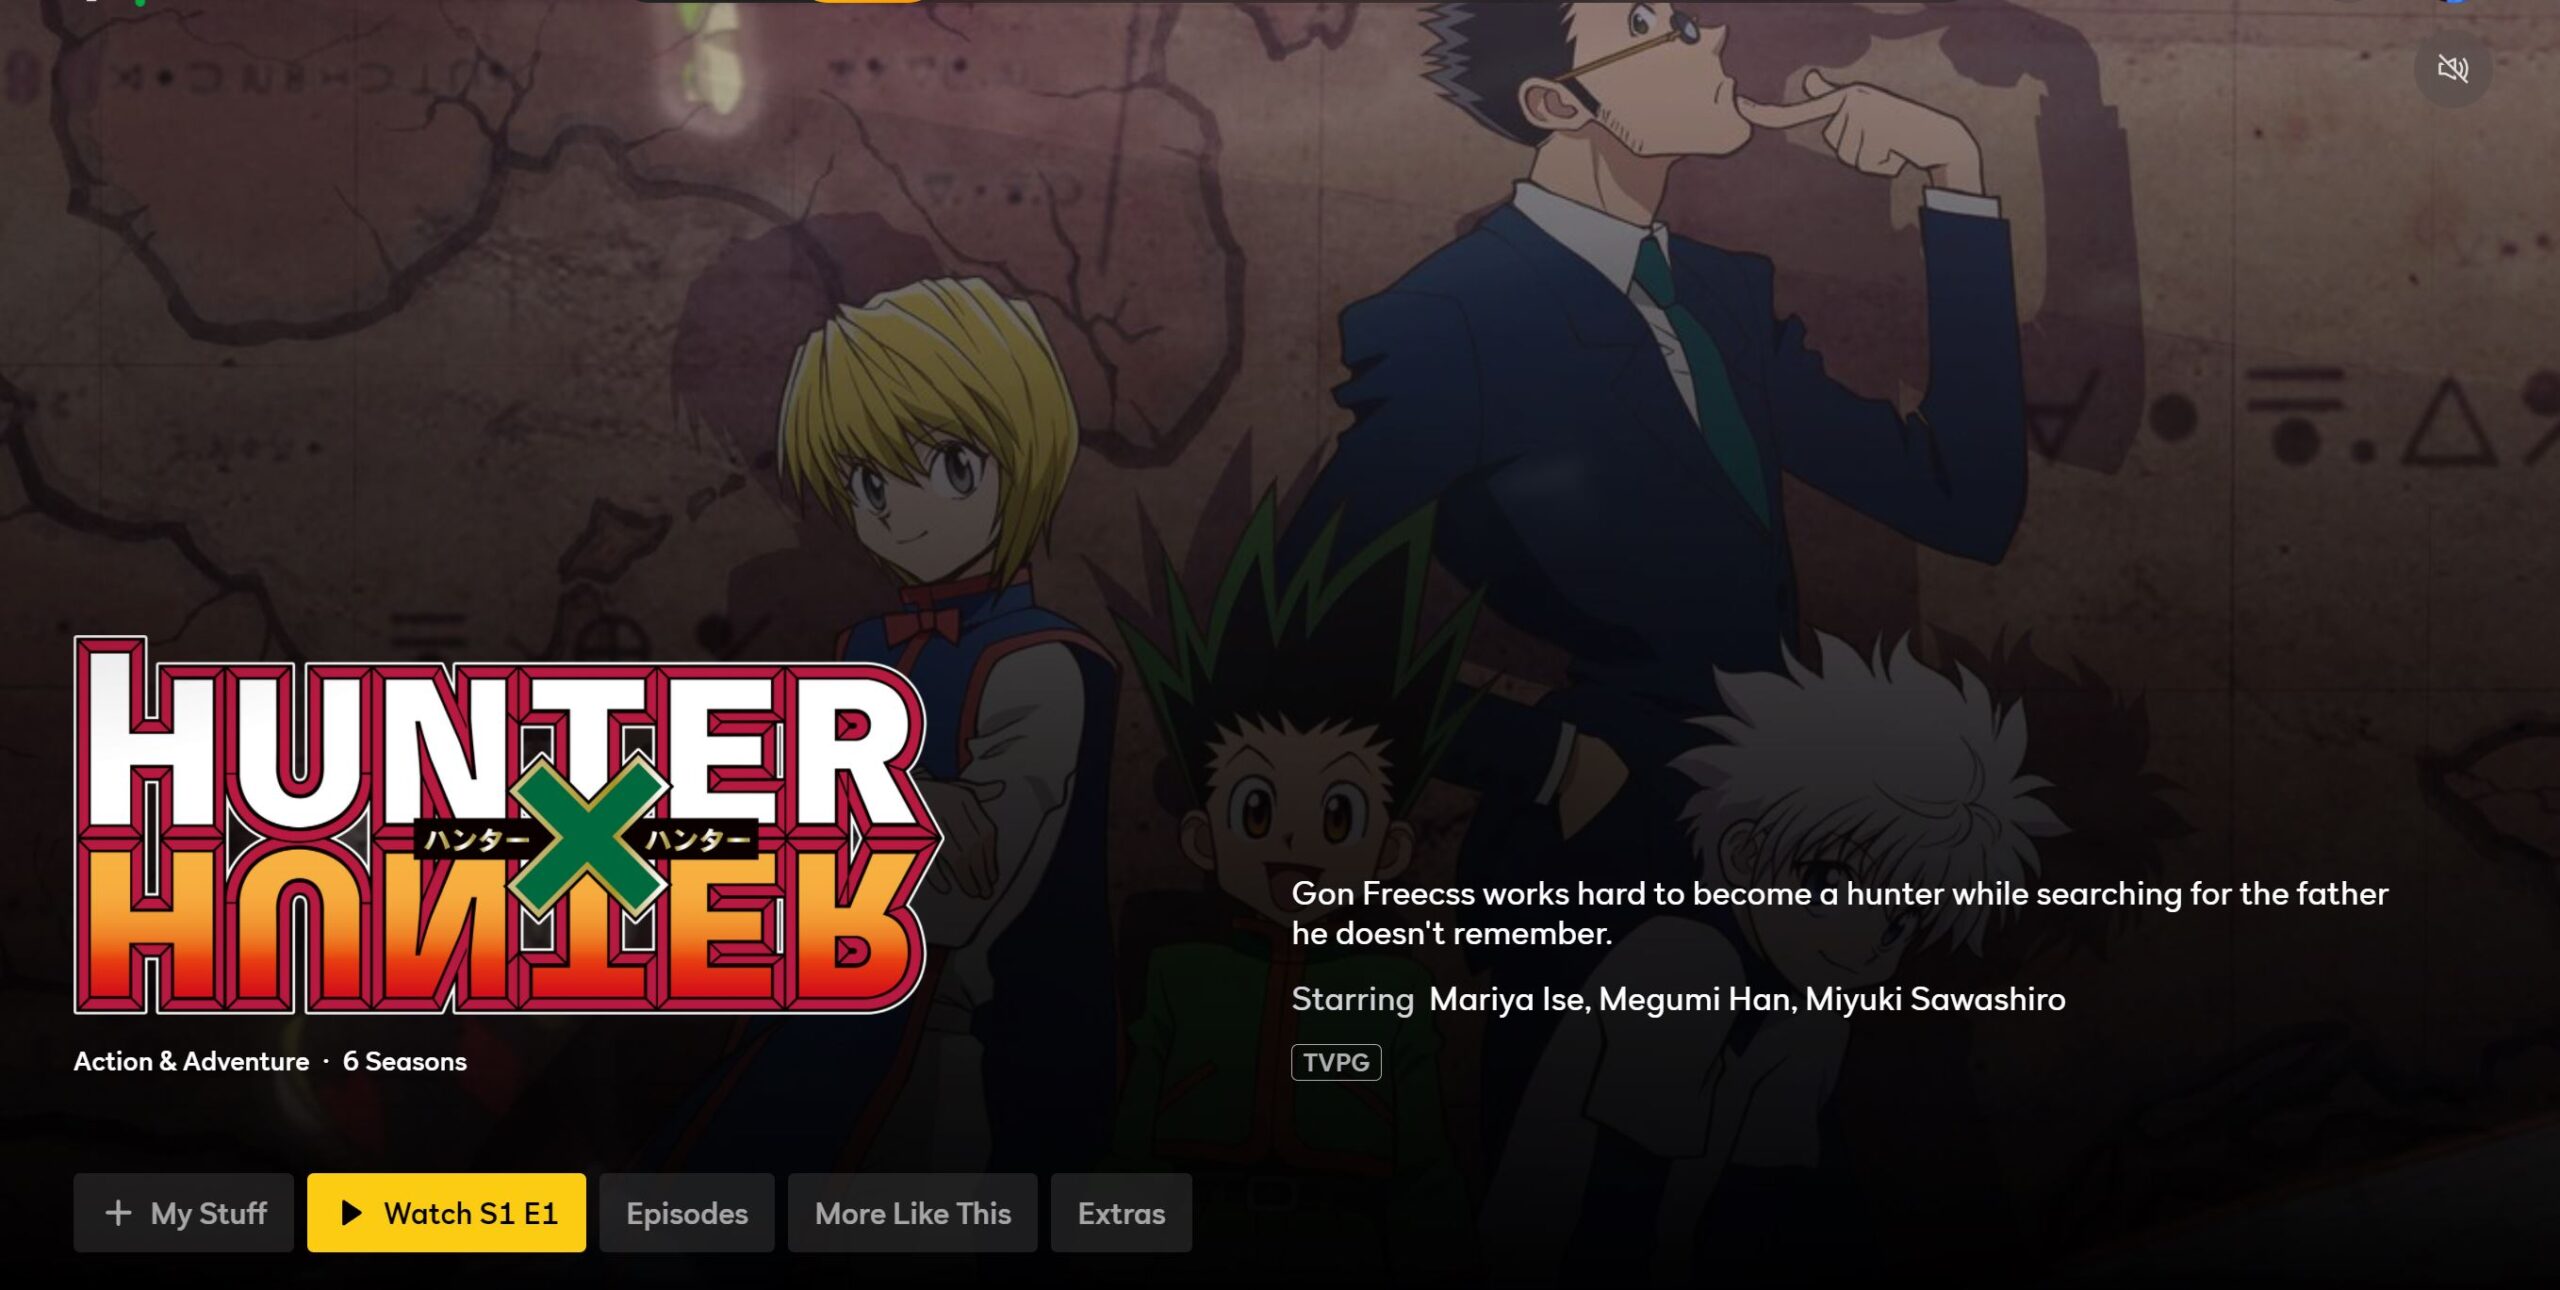 How To Watch Hunter X Hunter On Netflix? (All Episodes)